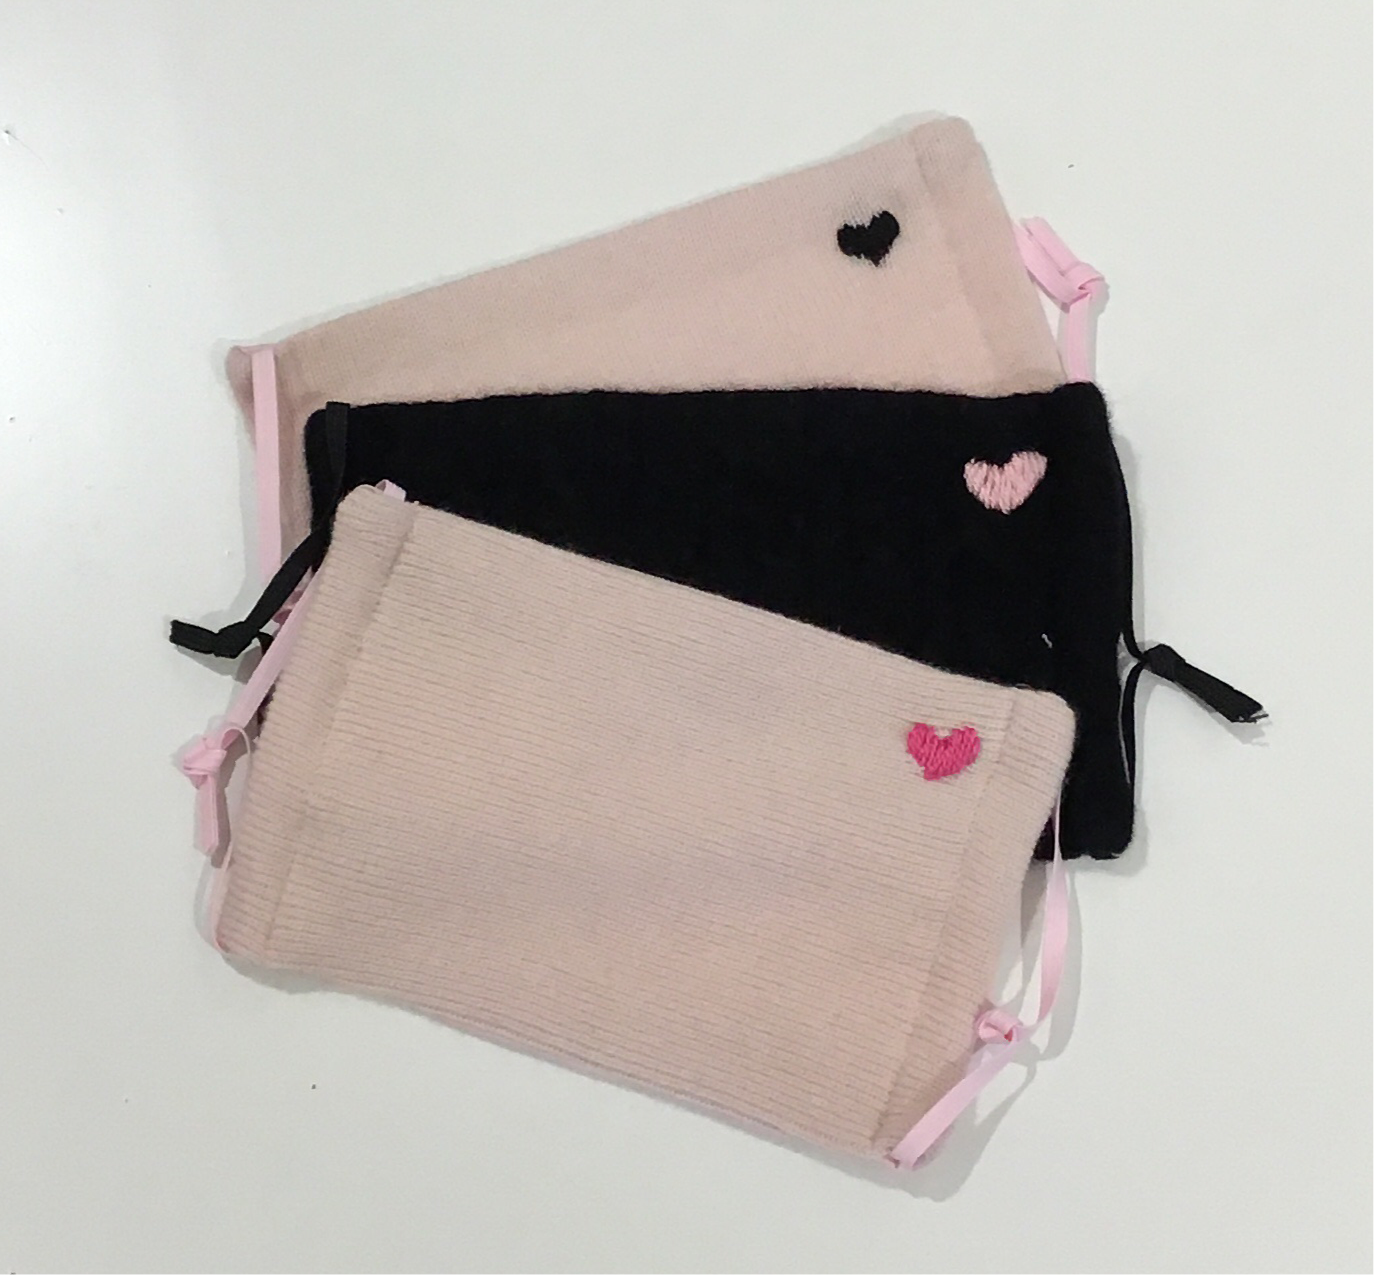 Cashmere Mask- Embroidered Heart- Pink with Black Heart